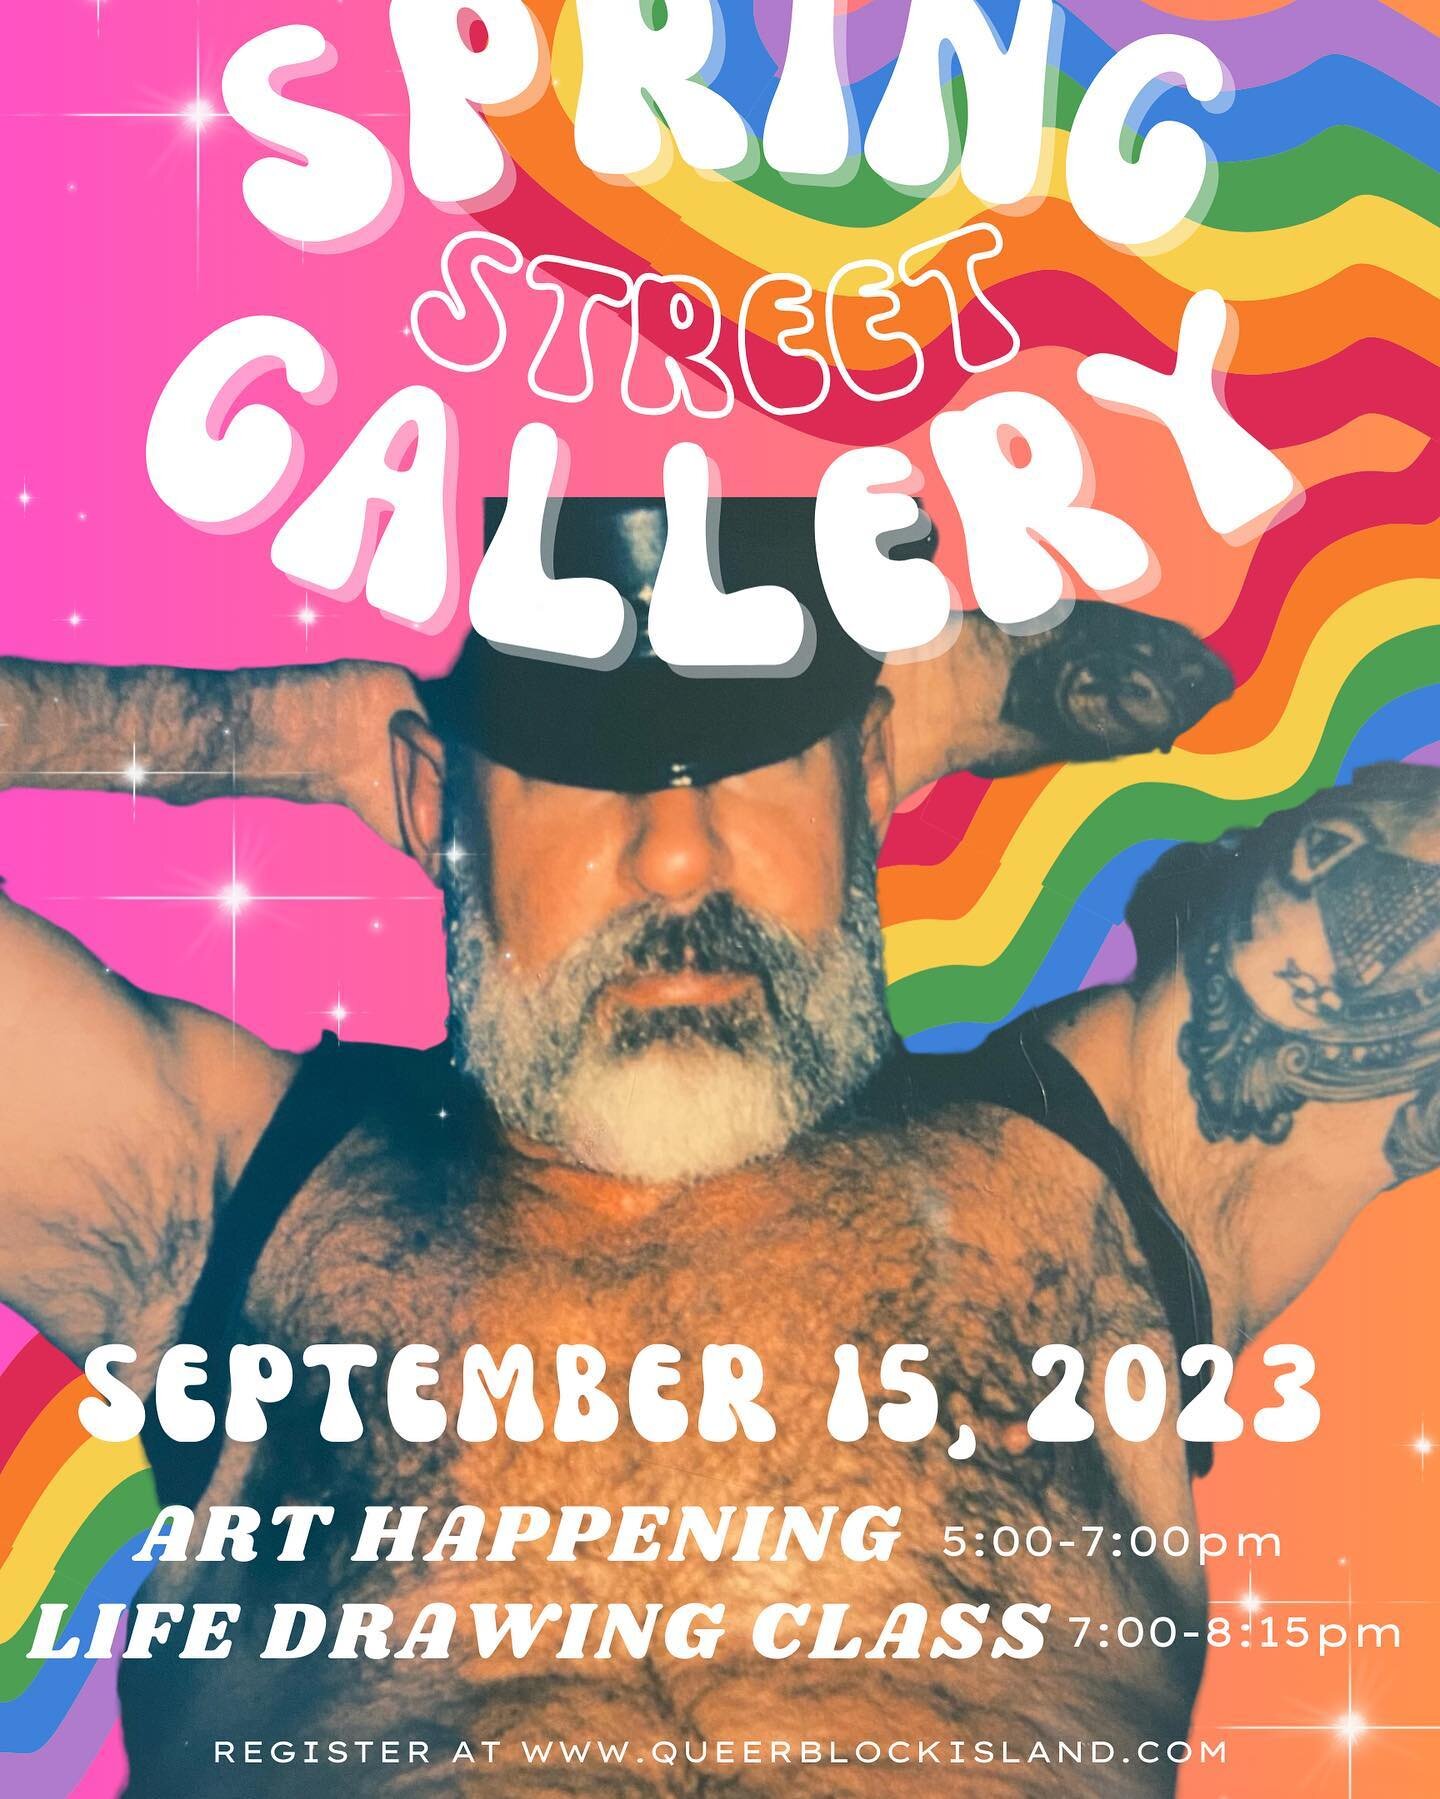 Join us at The Spring Street Gallery on September 15th from 5:00-8:15 PM to celebrate Block Island Pride with Austin Morin&rsquo;s Art Happening. Prepare to immerse yourself in a fusion of art, creativity, and celebration. Austin invites all people t